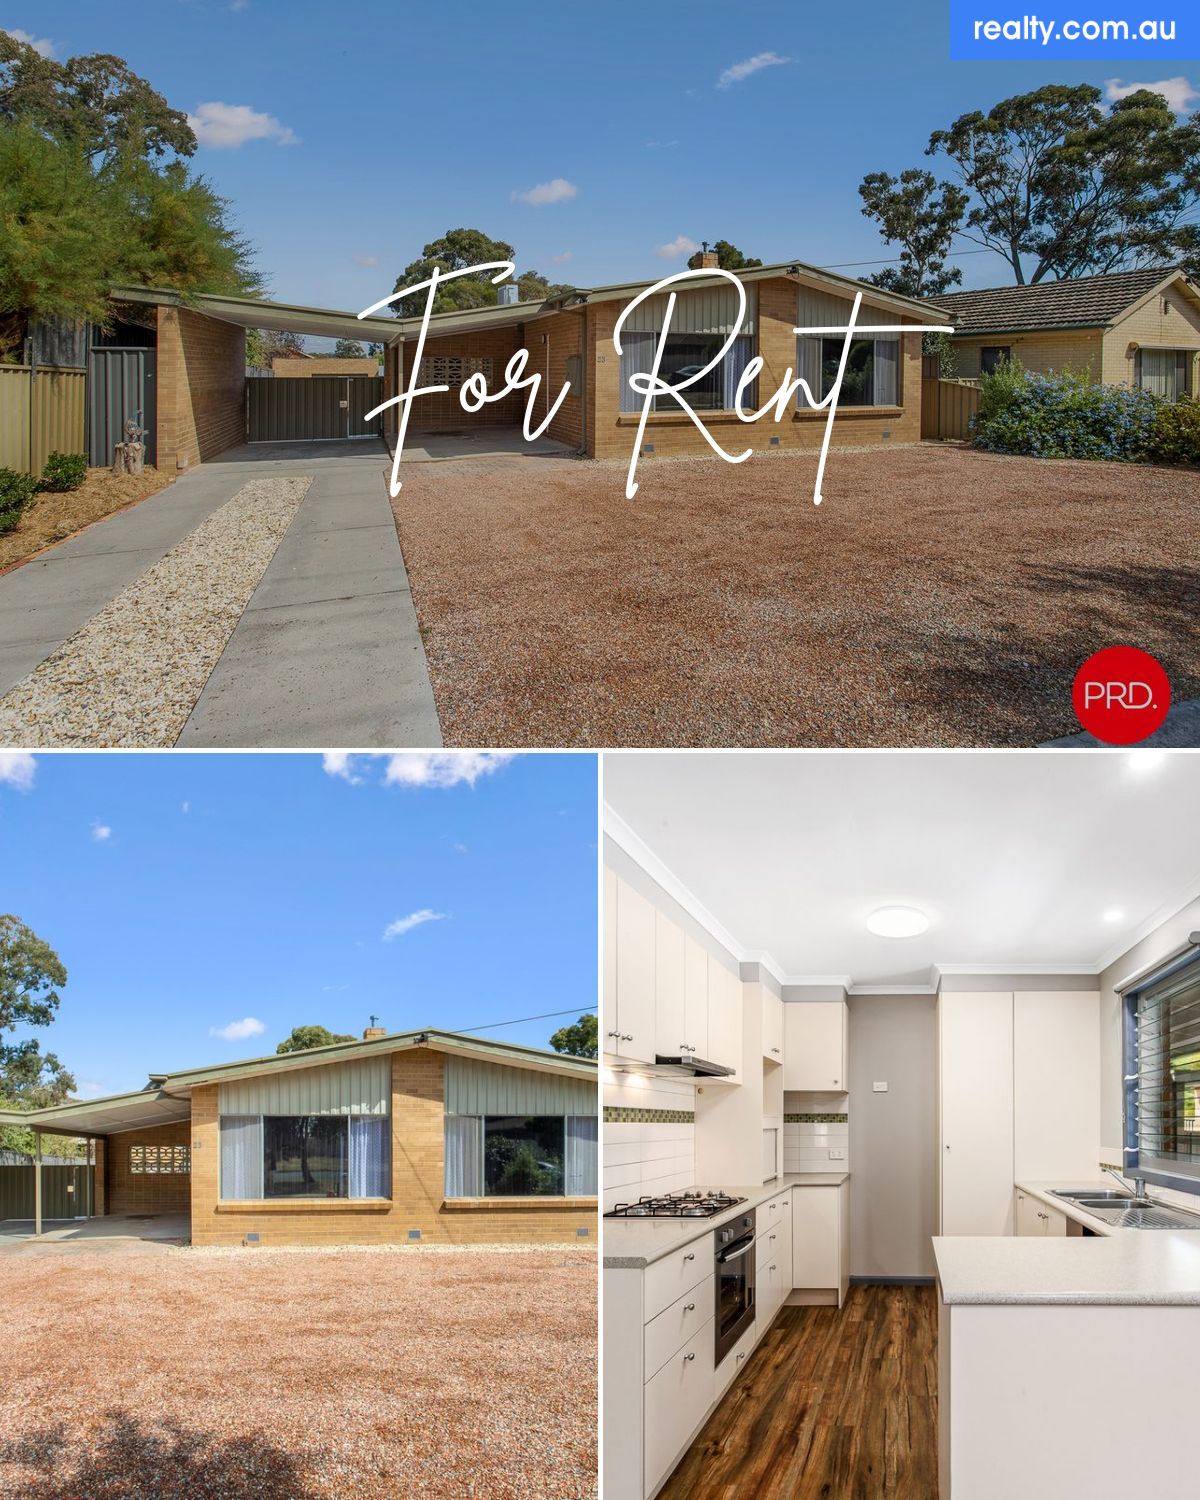 23 Holly Street, Golden Square, VIC 3555 | Realty.com.au